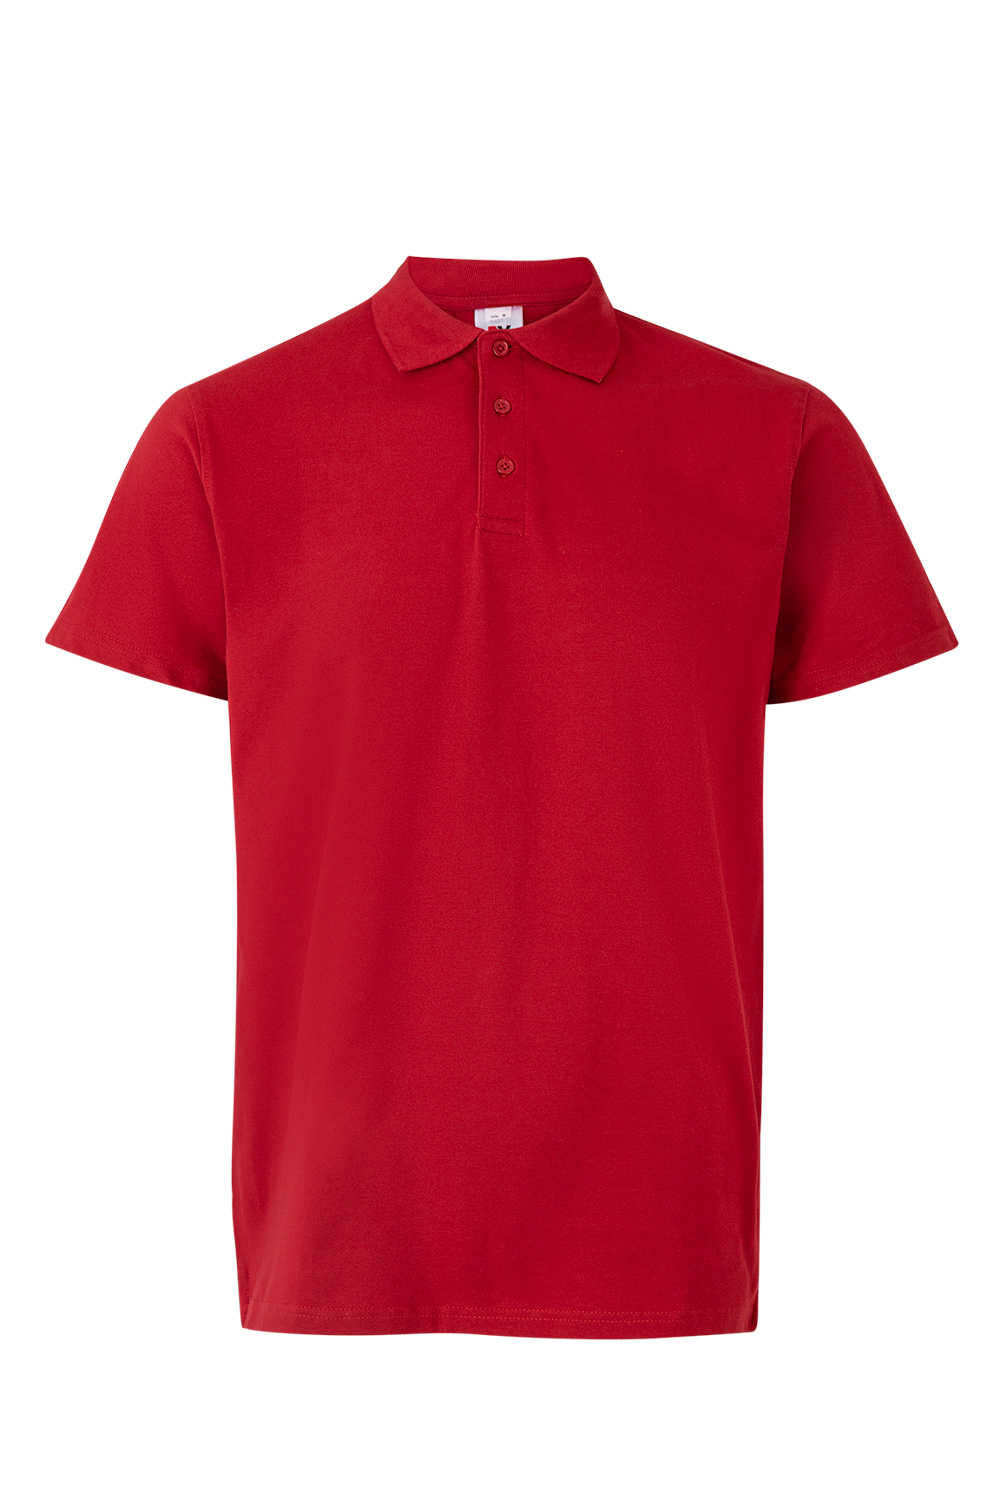 Polo Heren Premium Stretch Rood